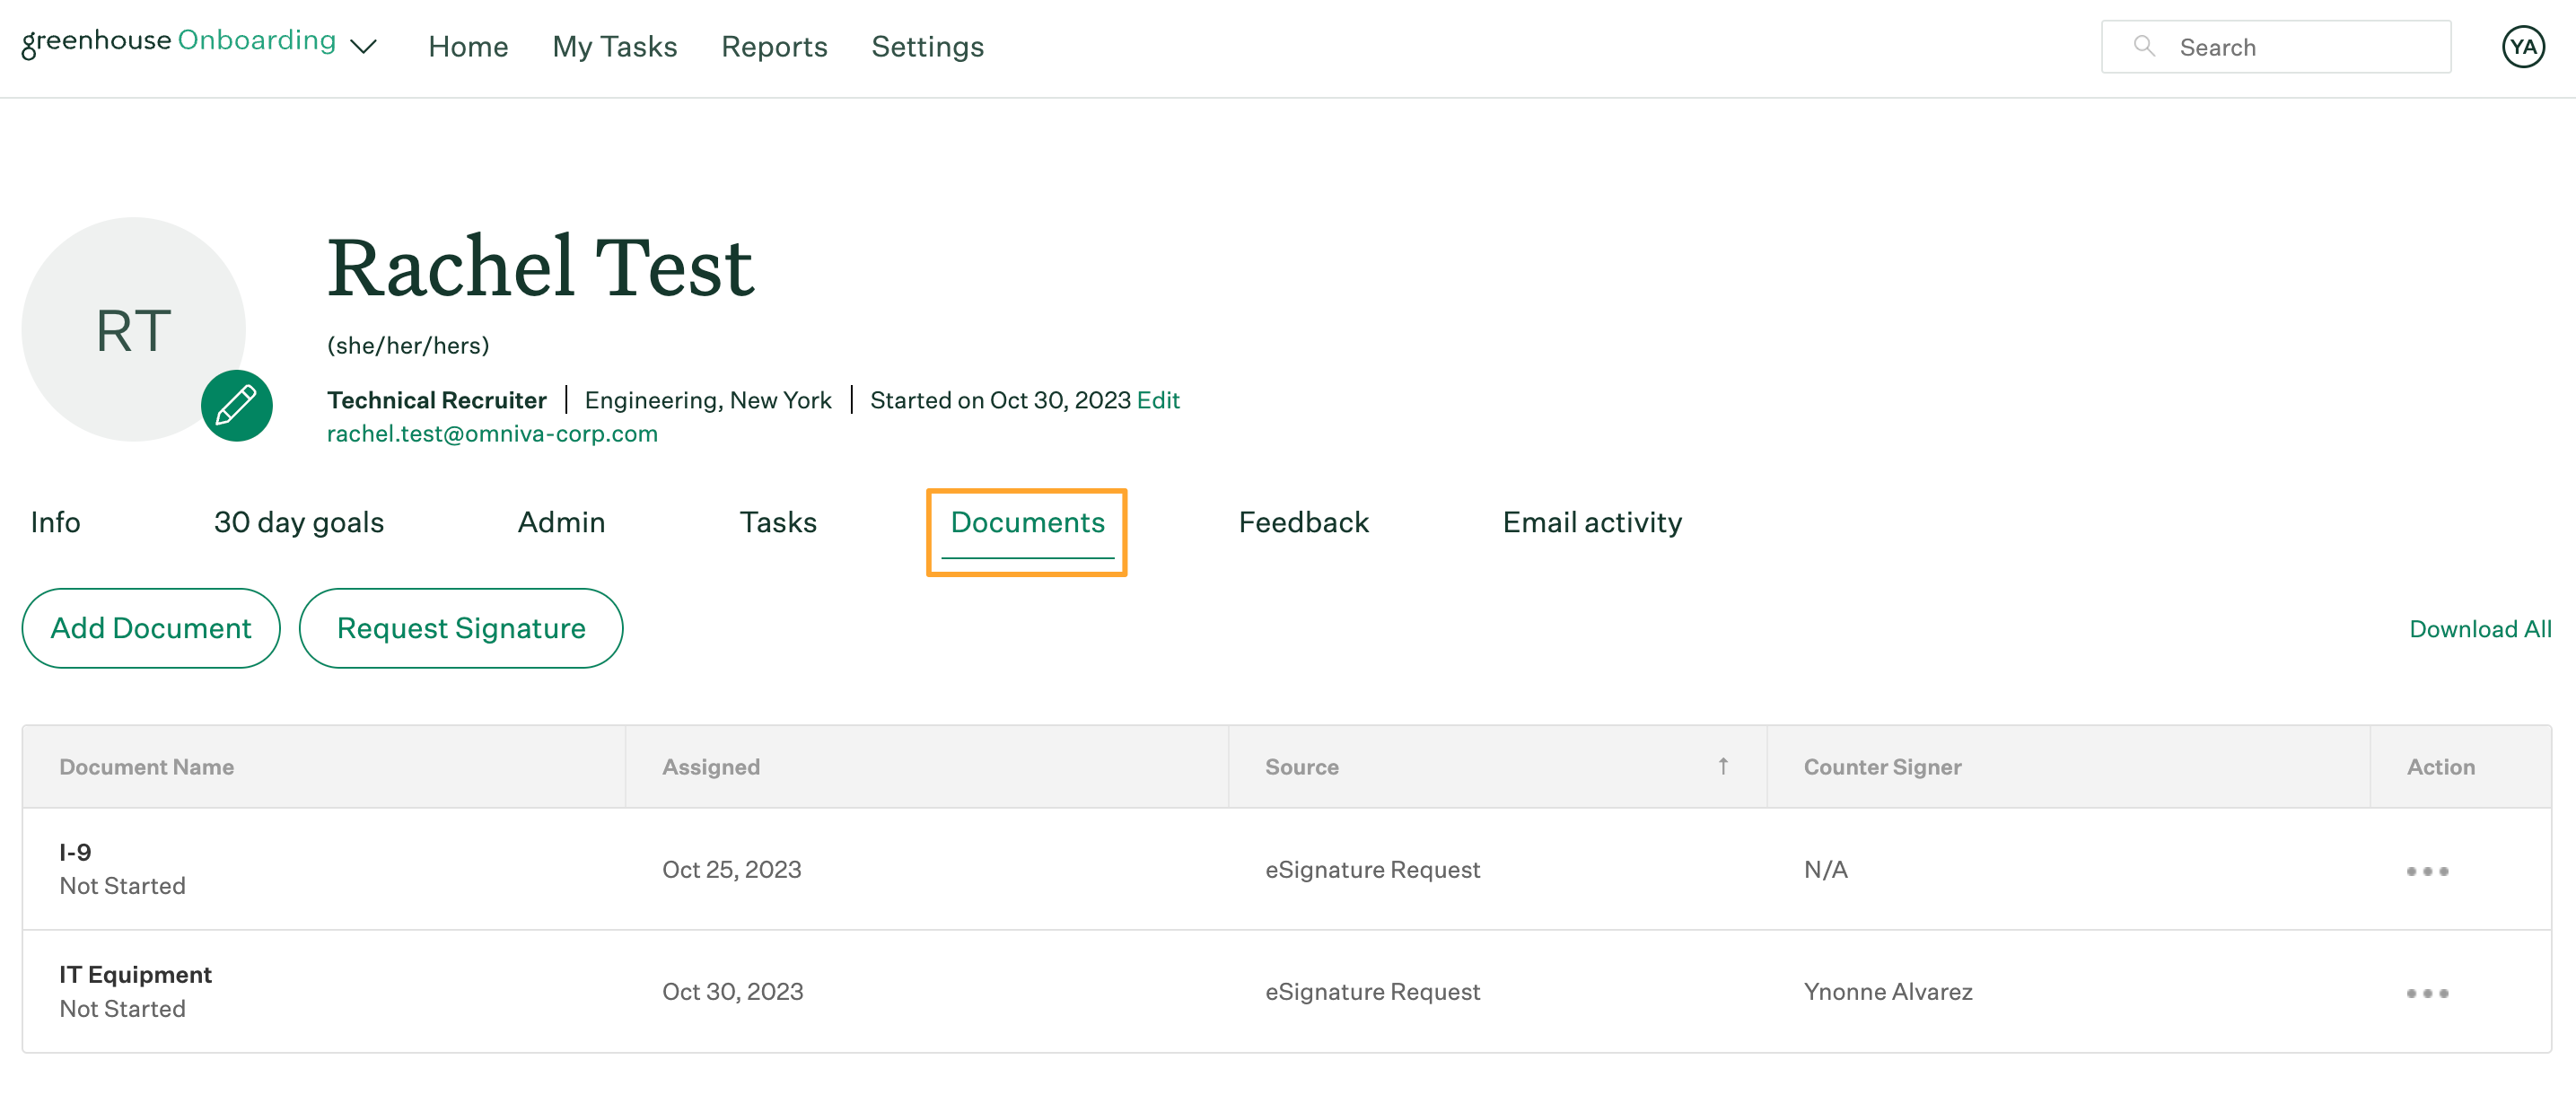 Employee profile in Greenhouse Onboarding with Documents tab opened and highlighted